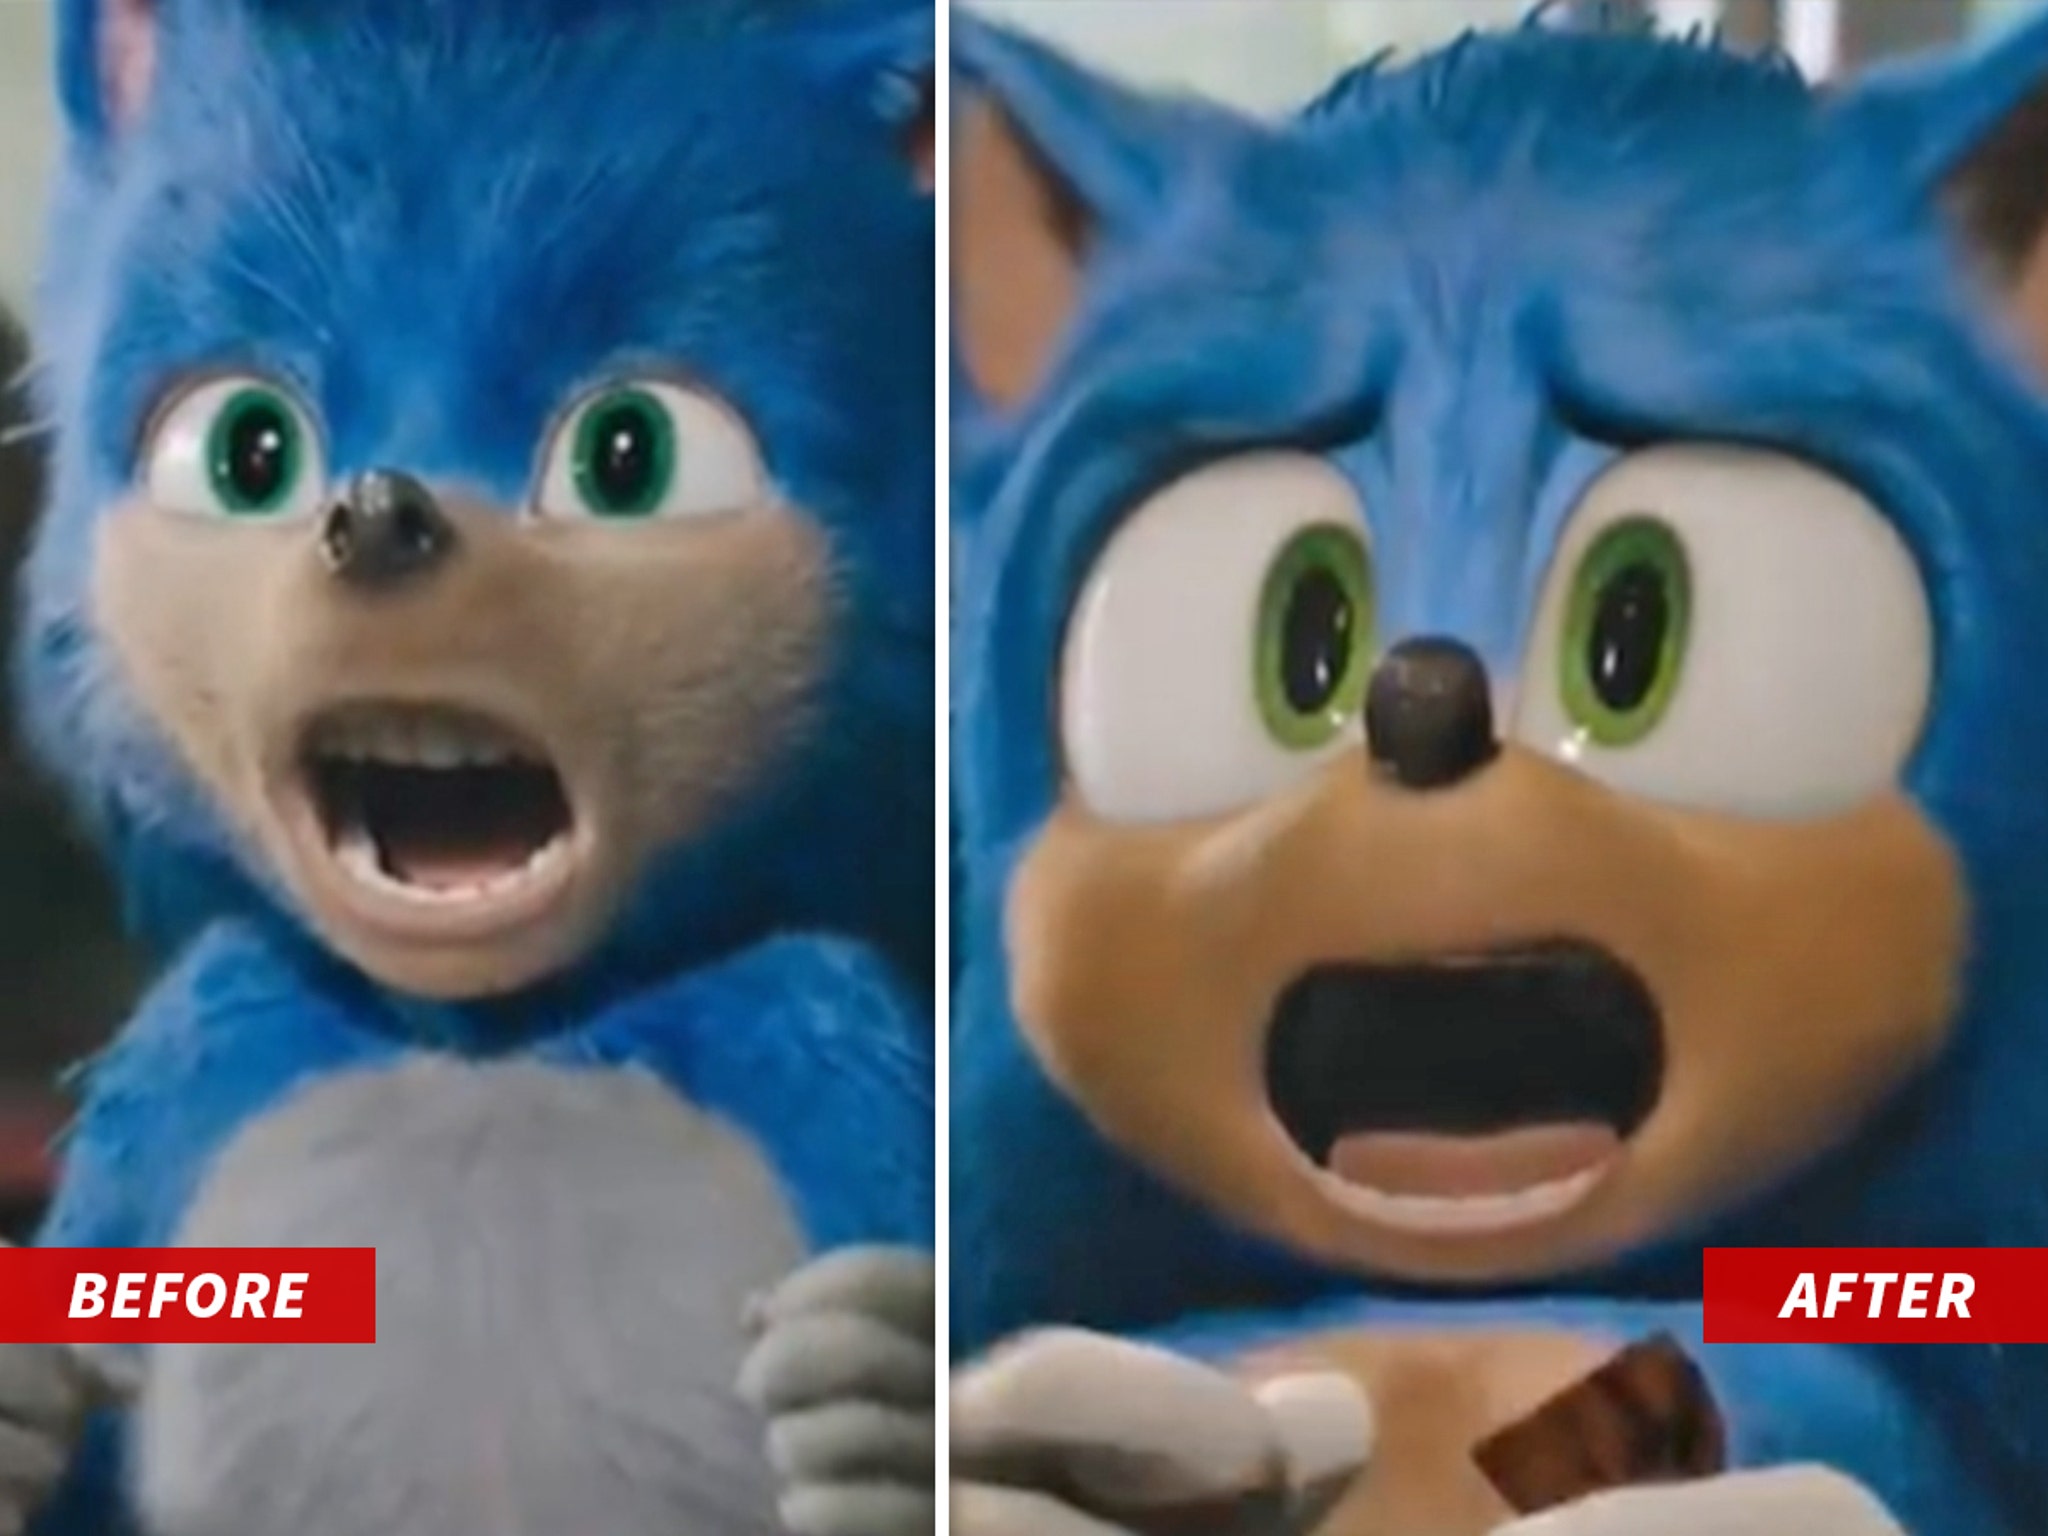 Sonic movie: Character dramatically redesigned following fan